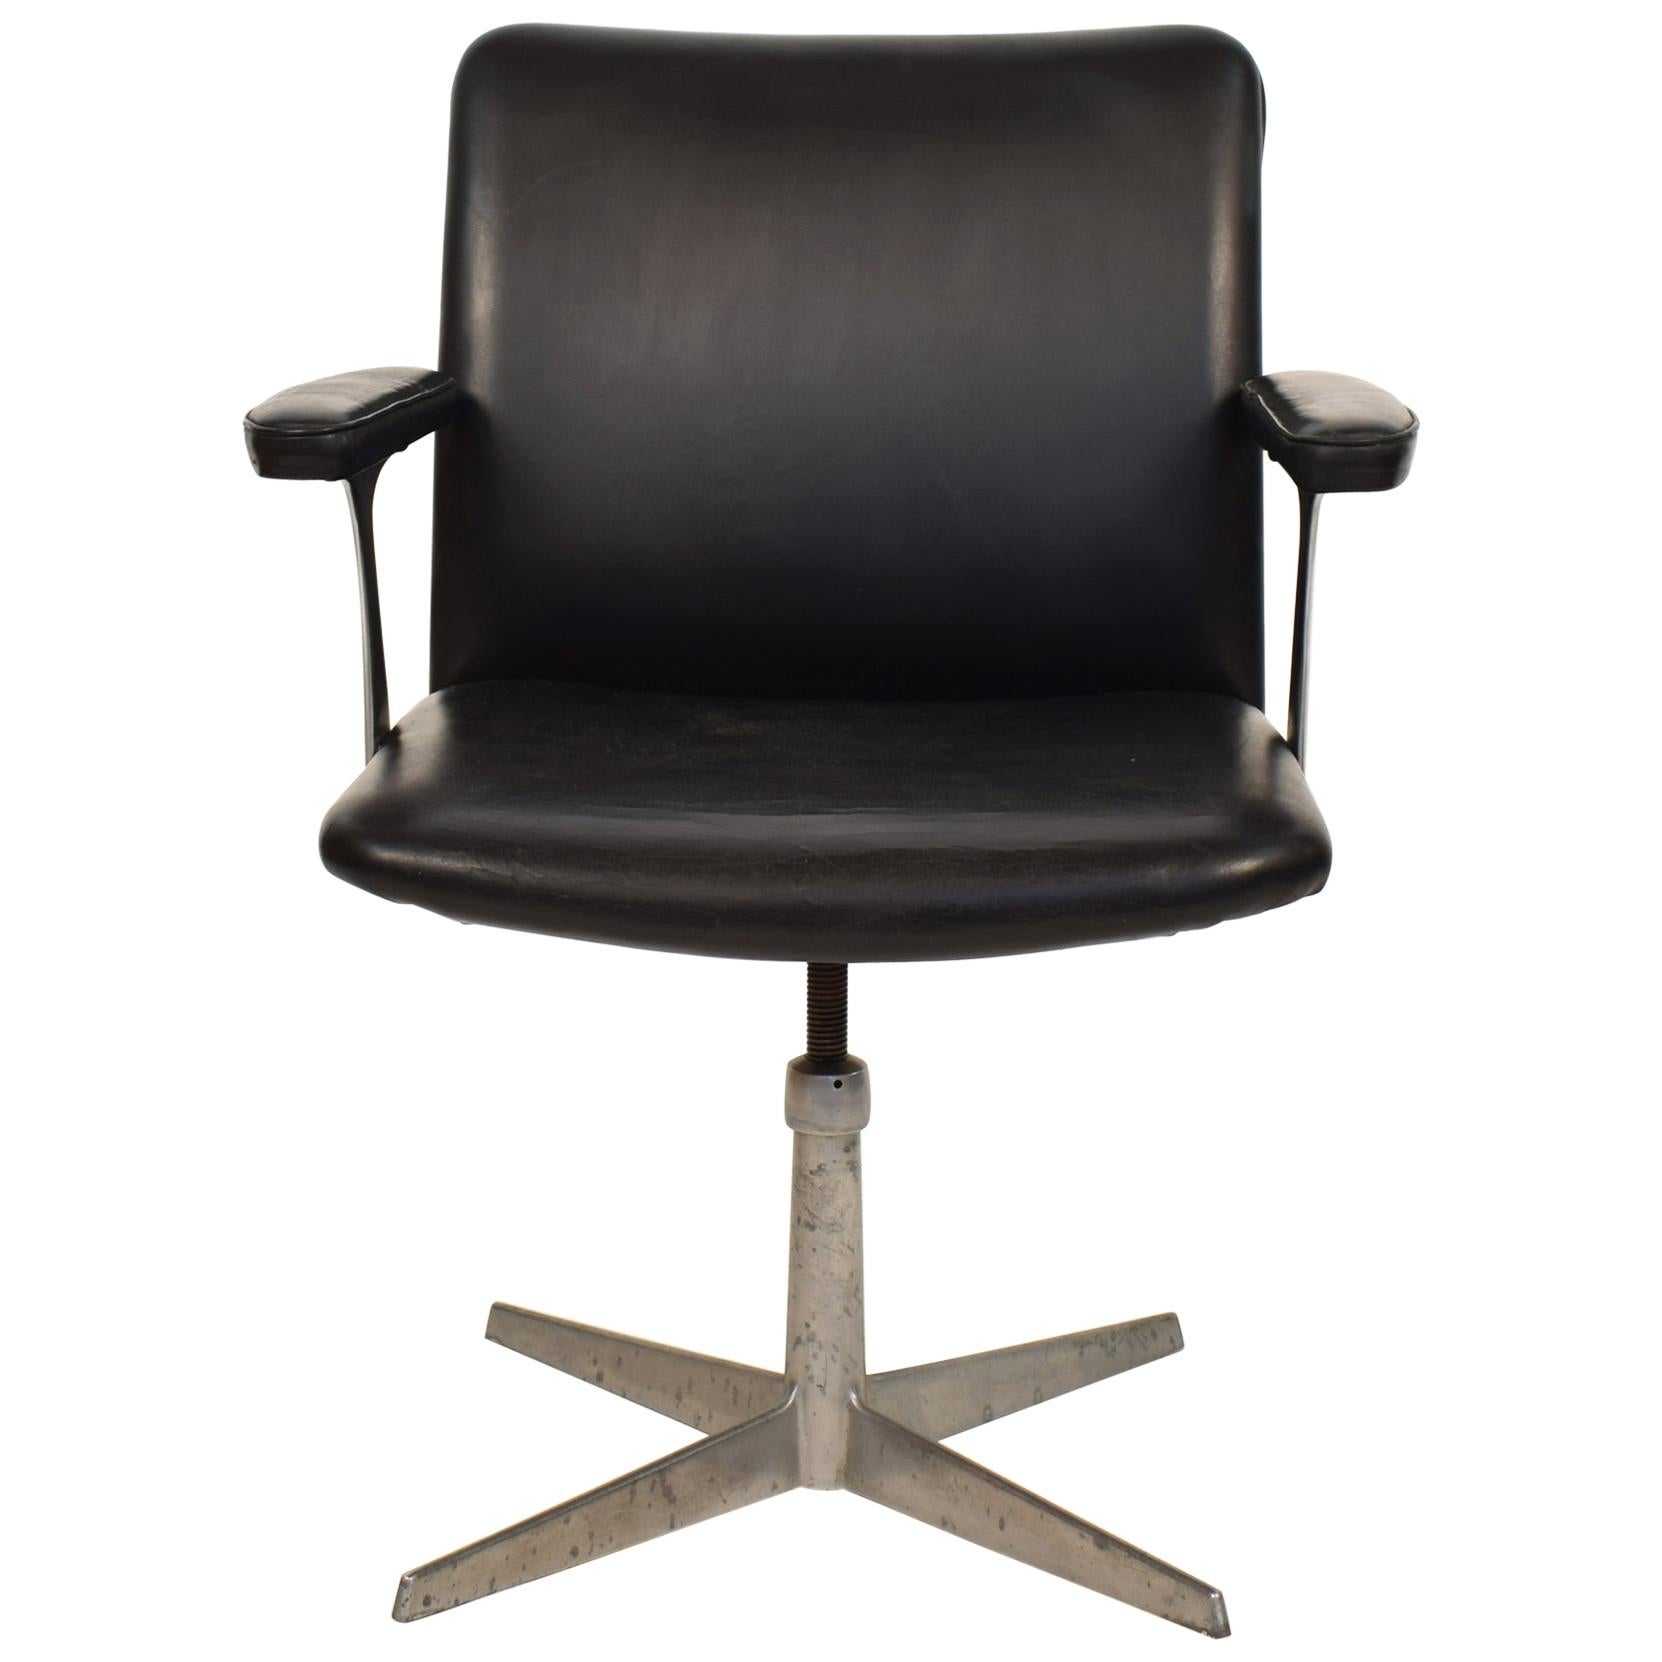 Midcentury Scandinavian Armchair in Black Leather and Aluminum, circa 1970 For Sale